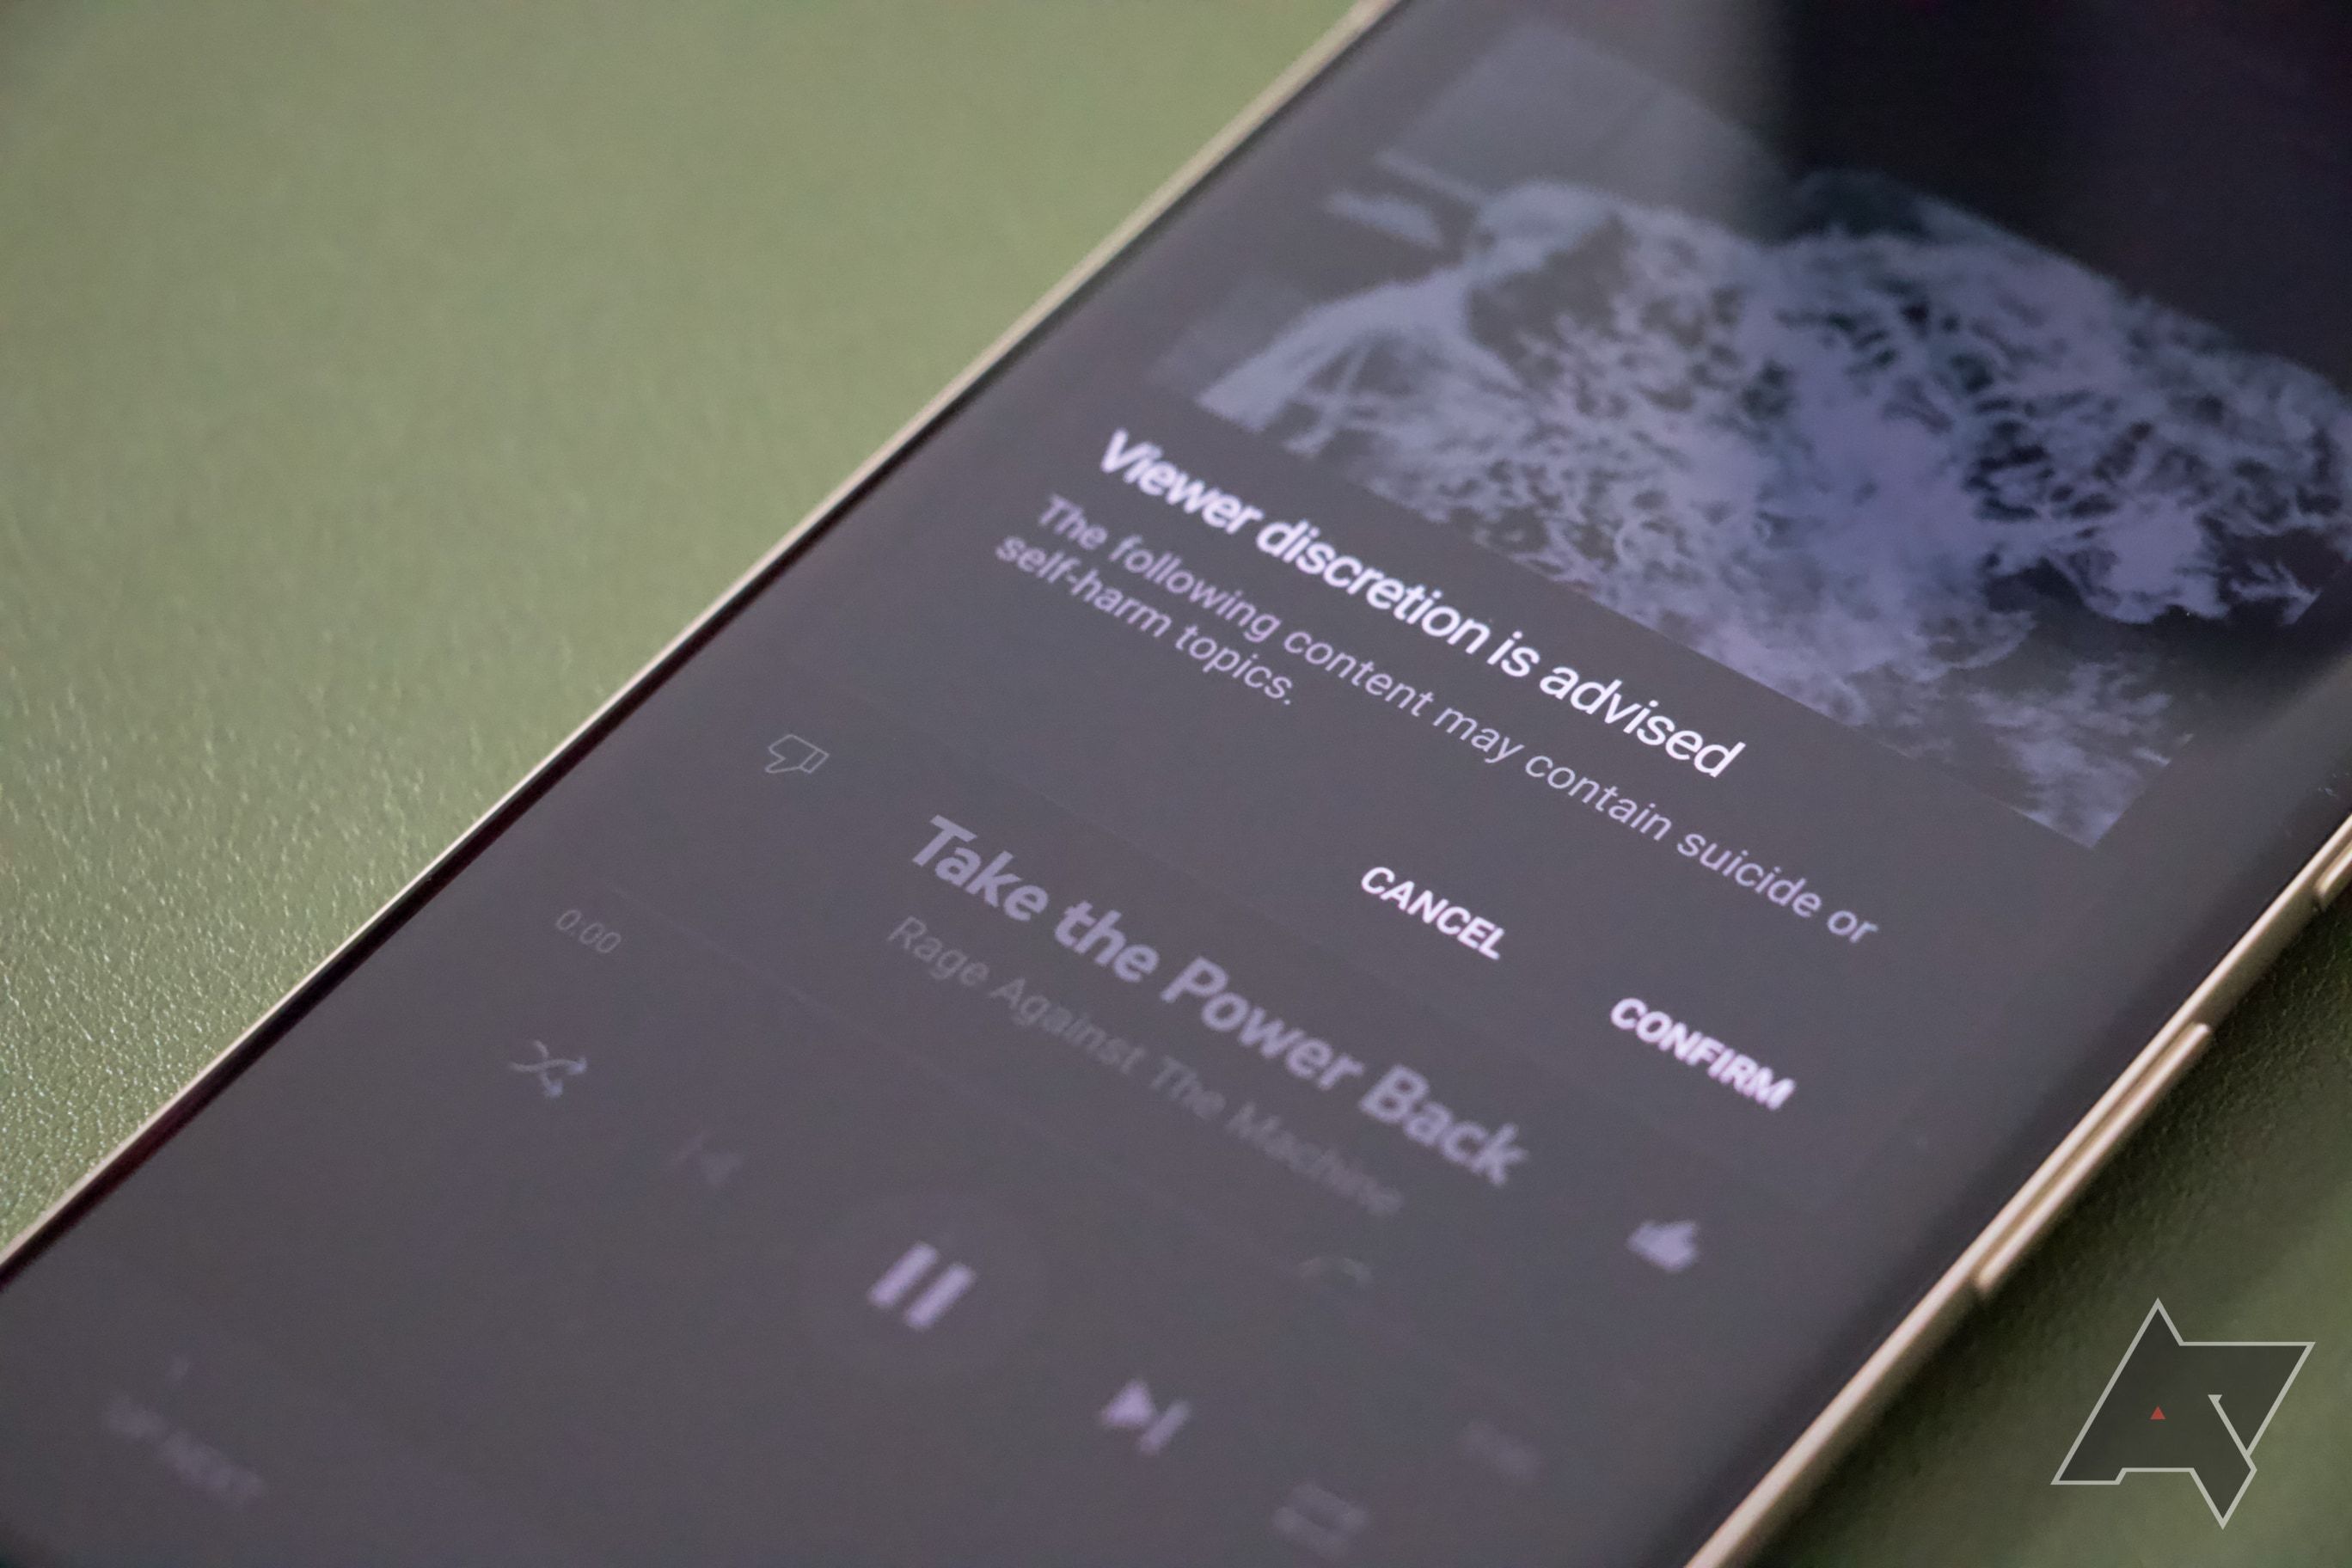 youtube-music-viewer-discrition-popup